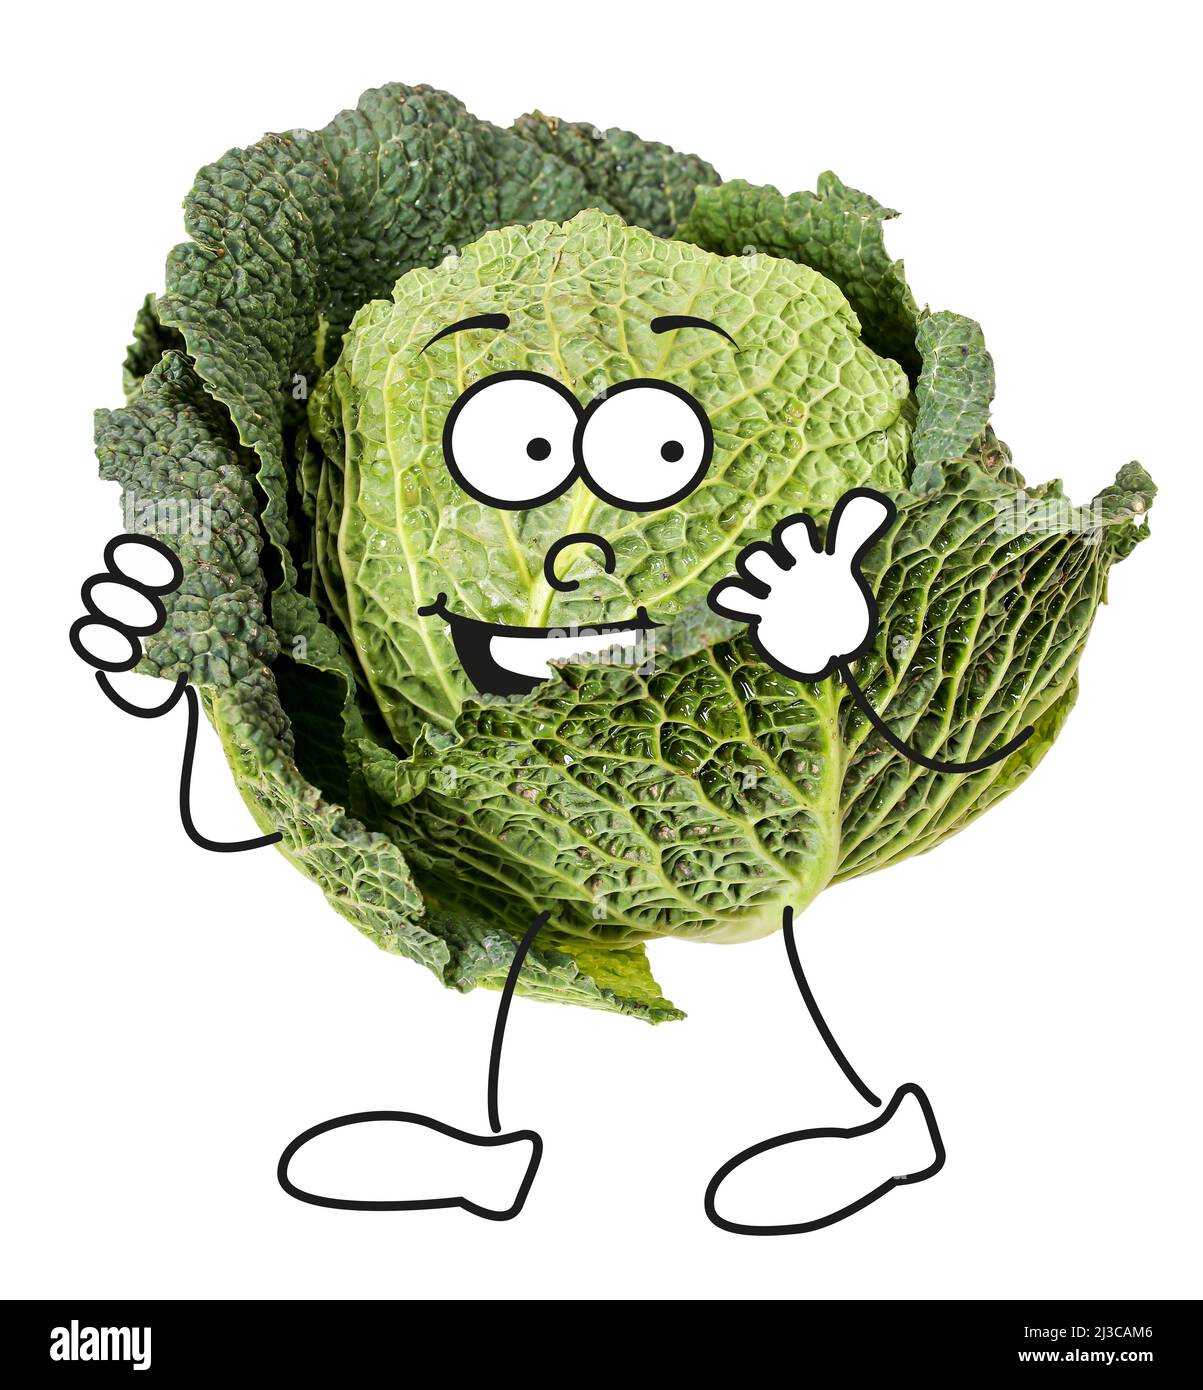 Savoy cabbage vegetable as comic character Stock Photo